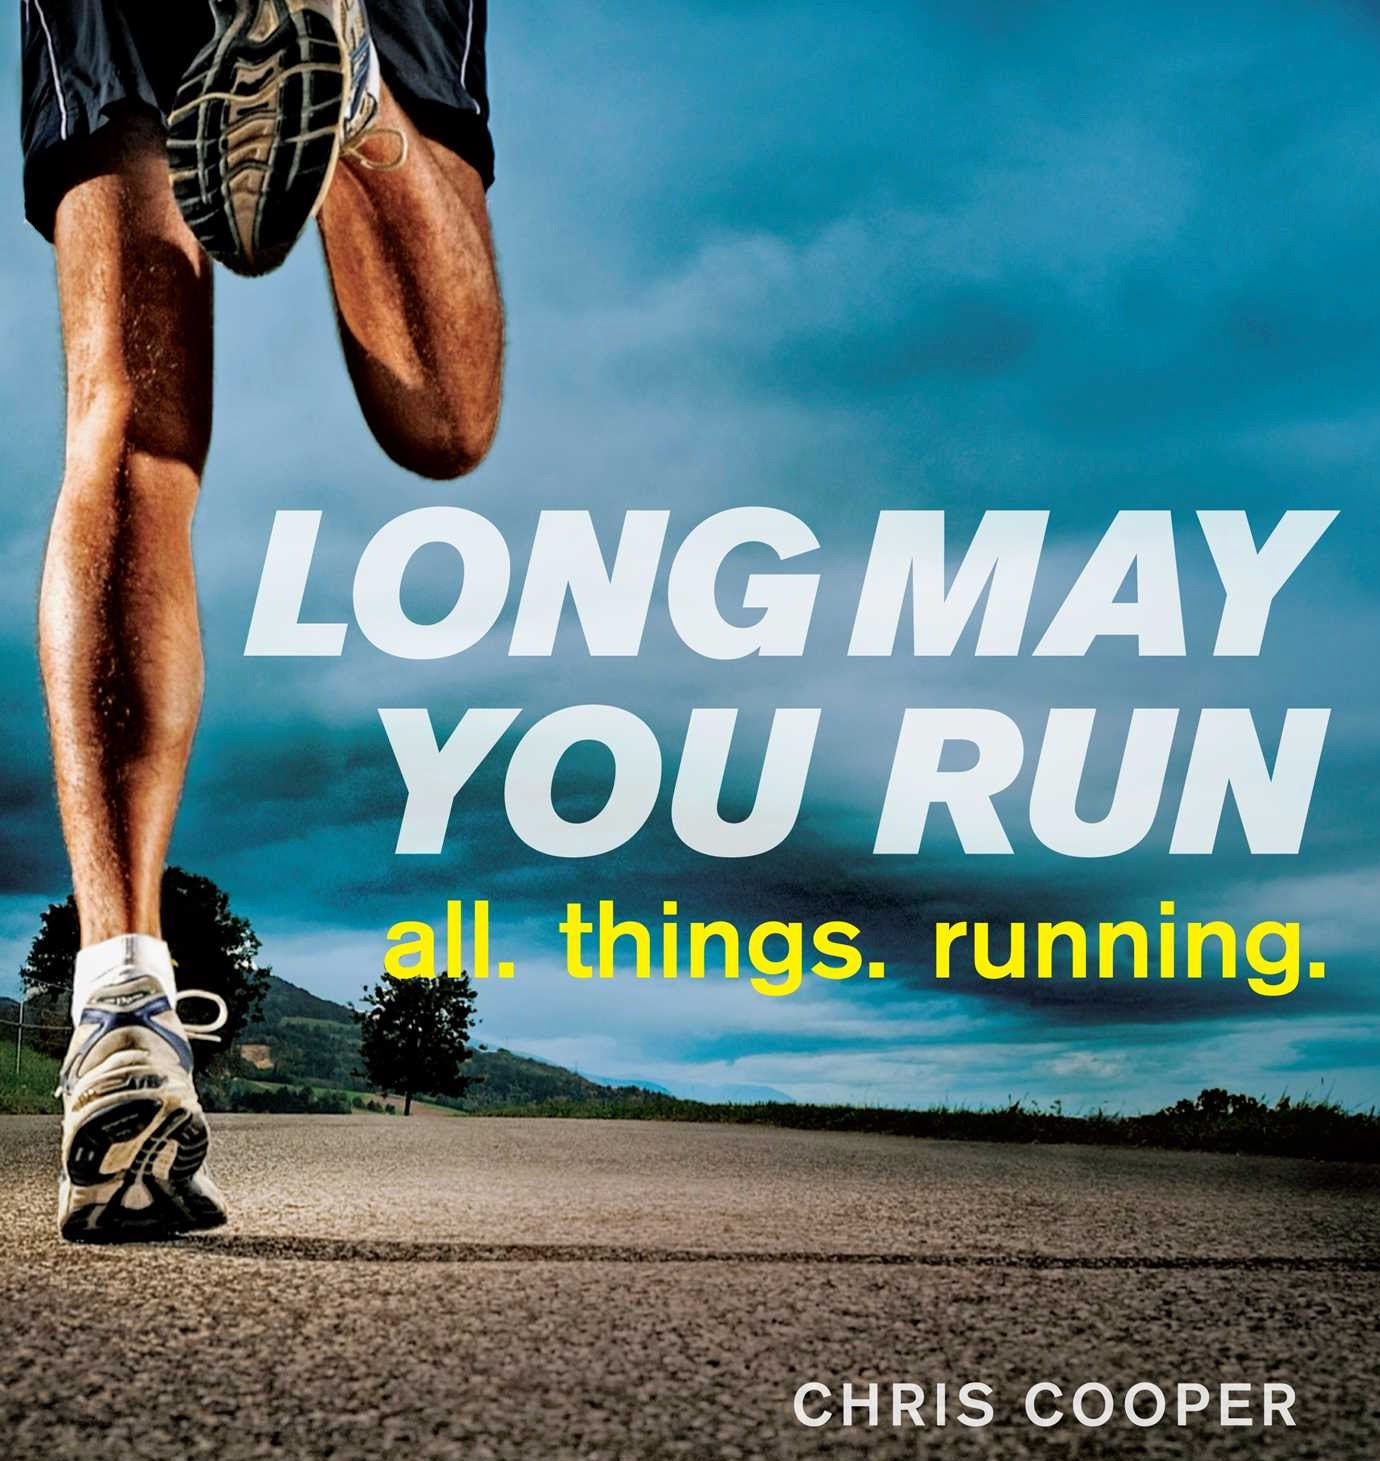 Book cover for Chris Cooper's "Long May You Run."